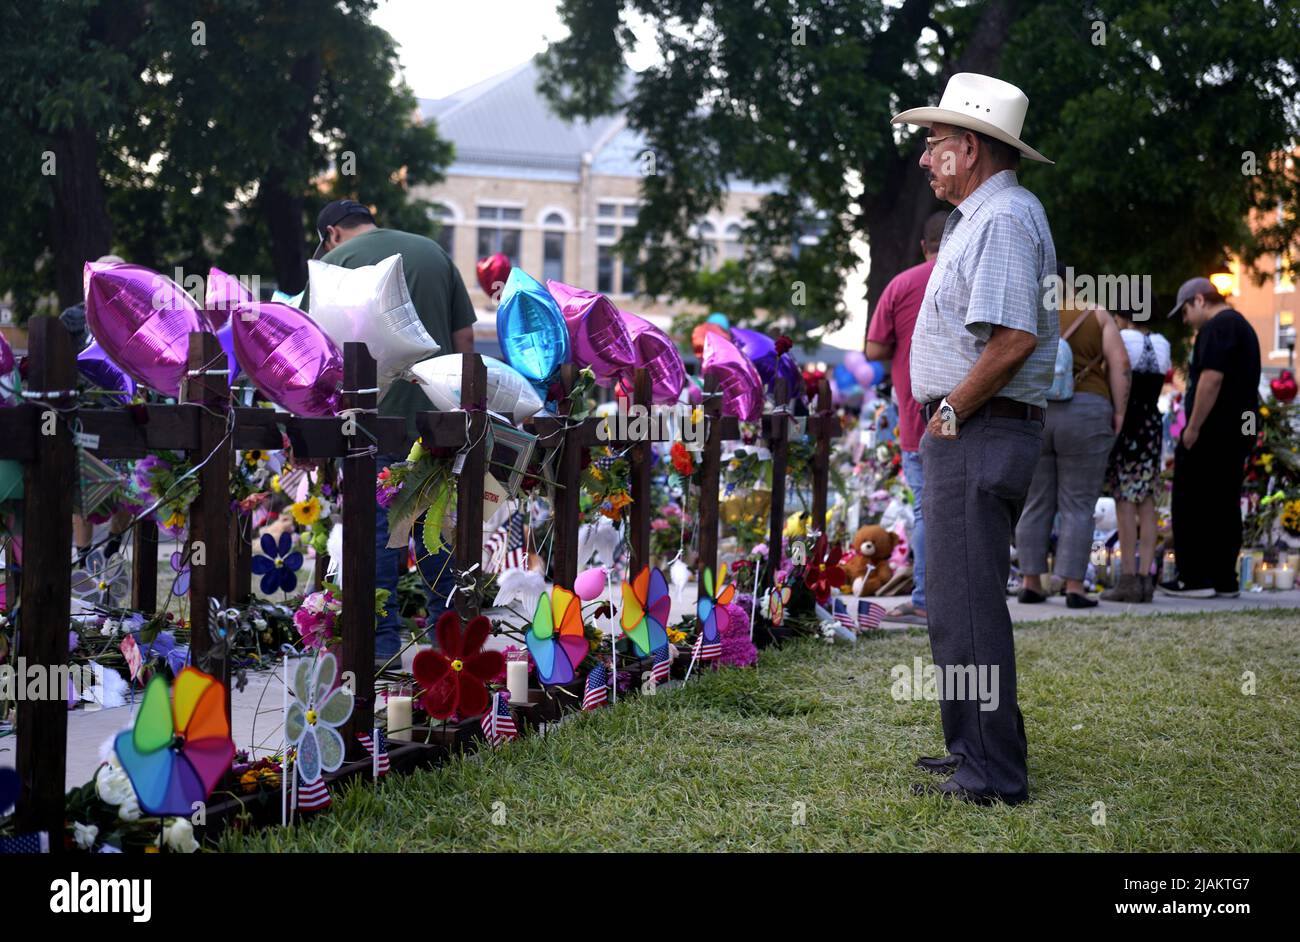 Uvalde, USA. 30th May, 2022. People mourn for victims of a school mass shooting at Town Square in Uvalde, Texas, the United States, May 30, 2022. At least 19 children and two adults were killed in a shooting at Robb Elementary School in the town of Uvalde, Texas, on May 24. Credit: Wu Xiaoling/Xinhua/Alamy Live News Stock Photo